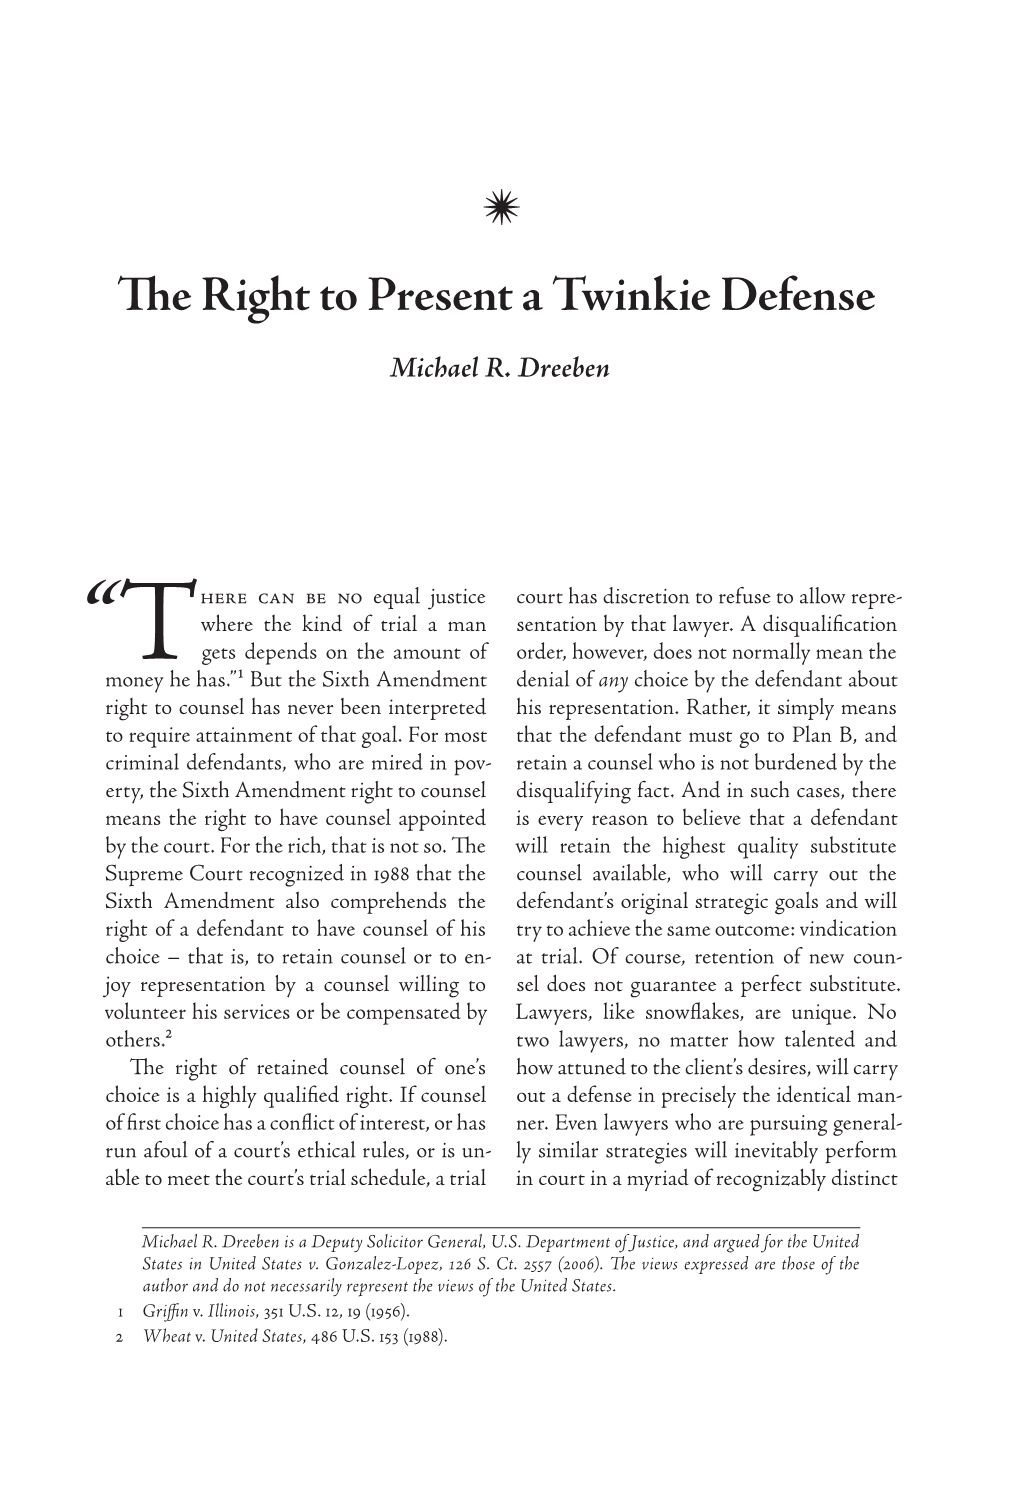 The Right to Present a Twinkie Defense